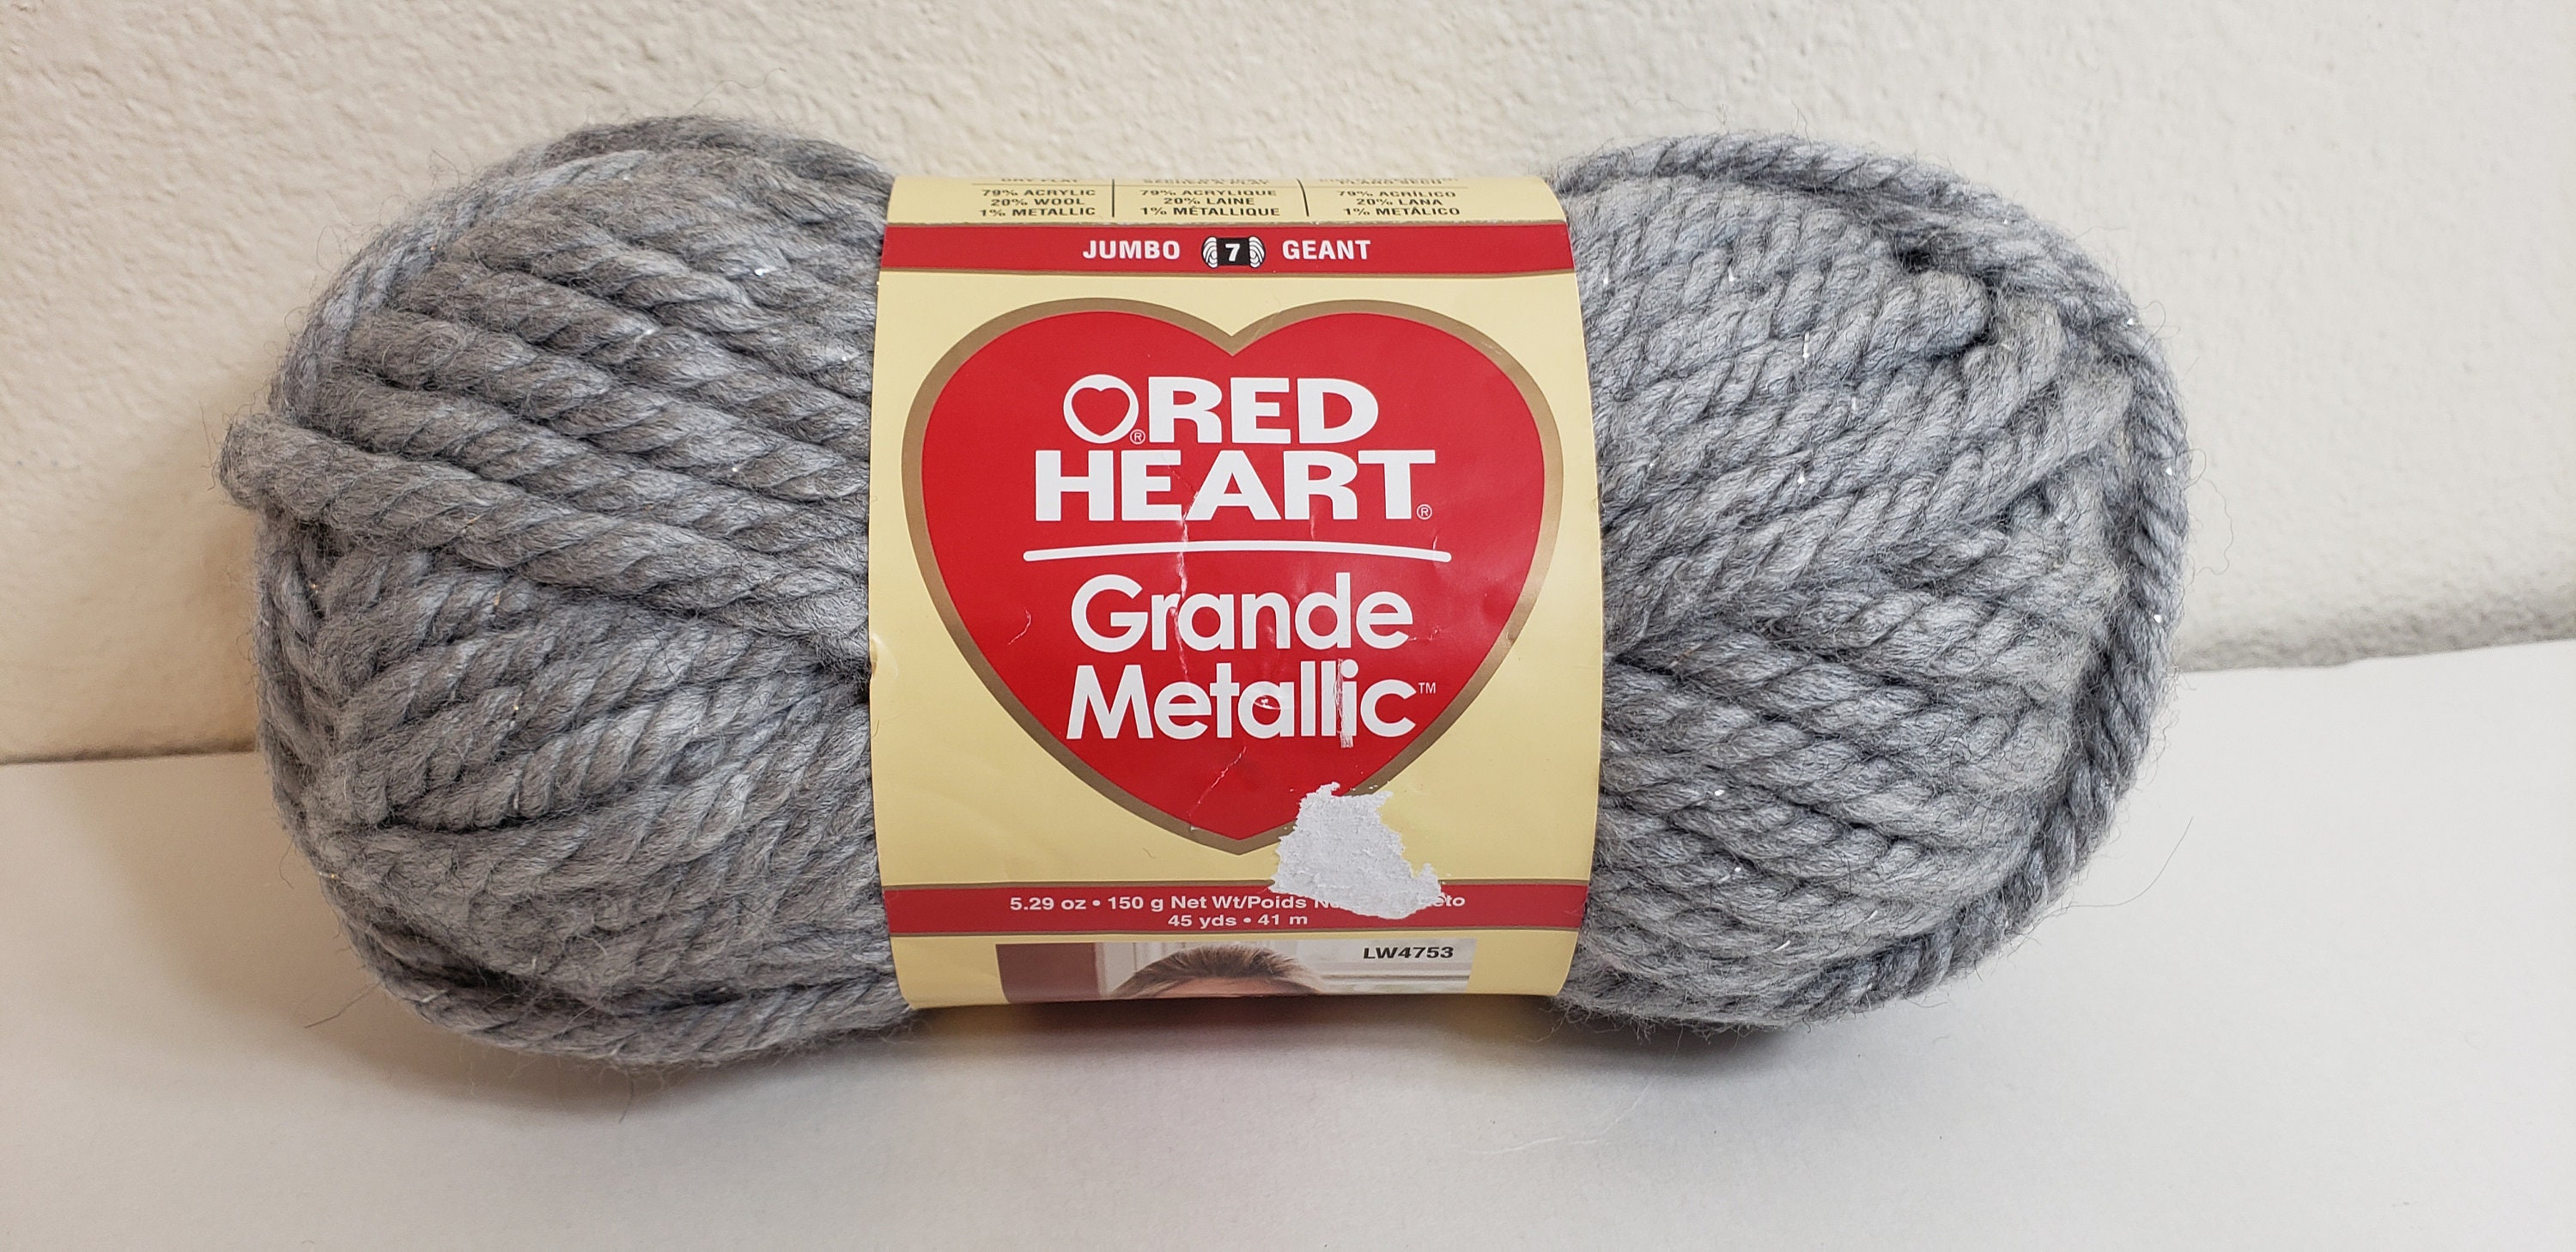 Red Heart 100% Virgin Wool 4-ply Yarn - 2 Skeins - Staccato Blue Dye Lot  4491 on eBid United States